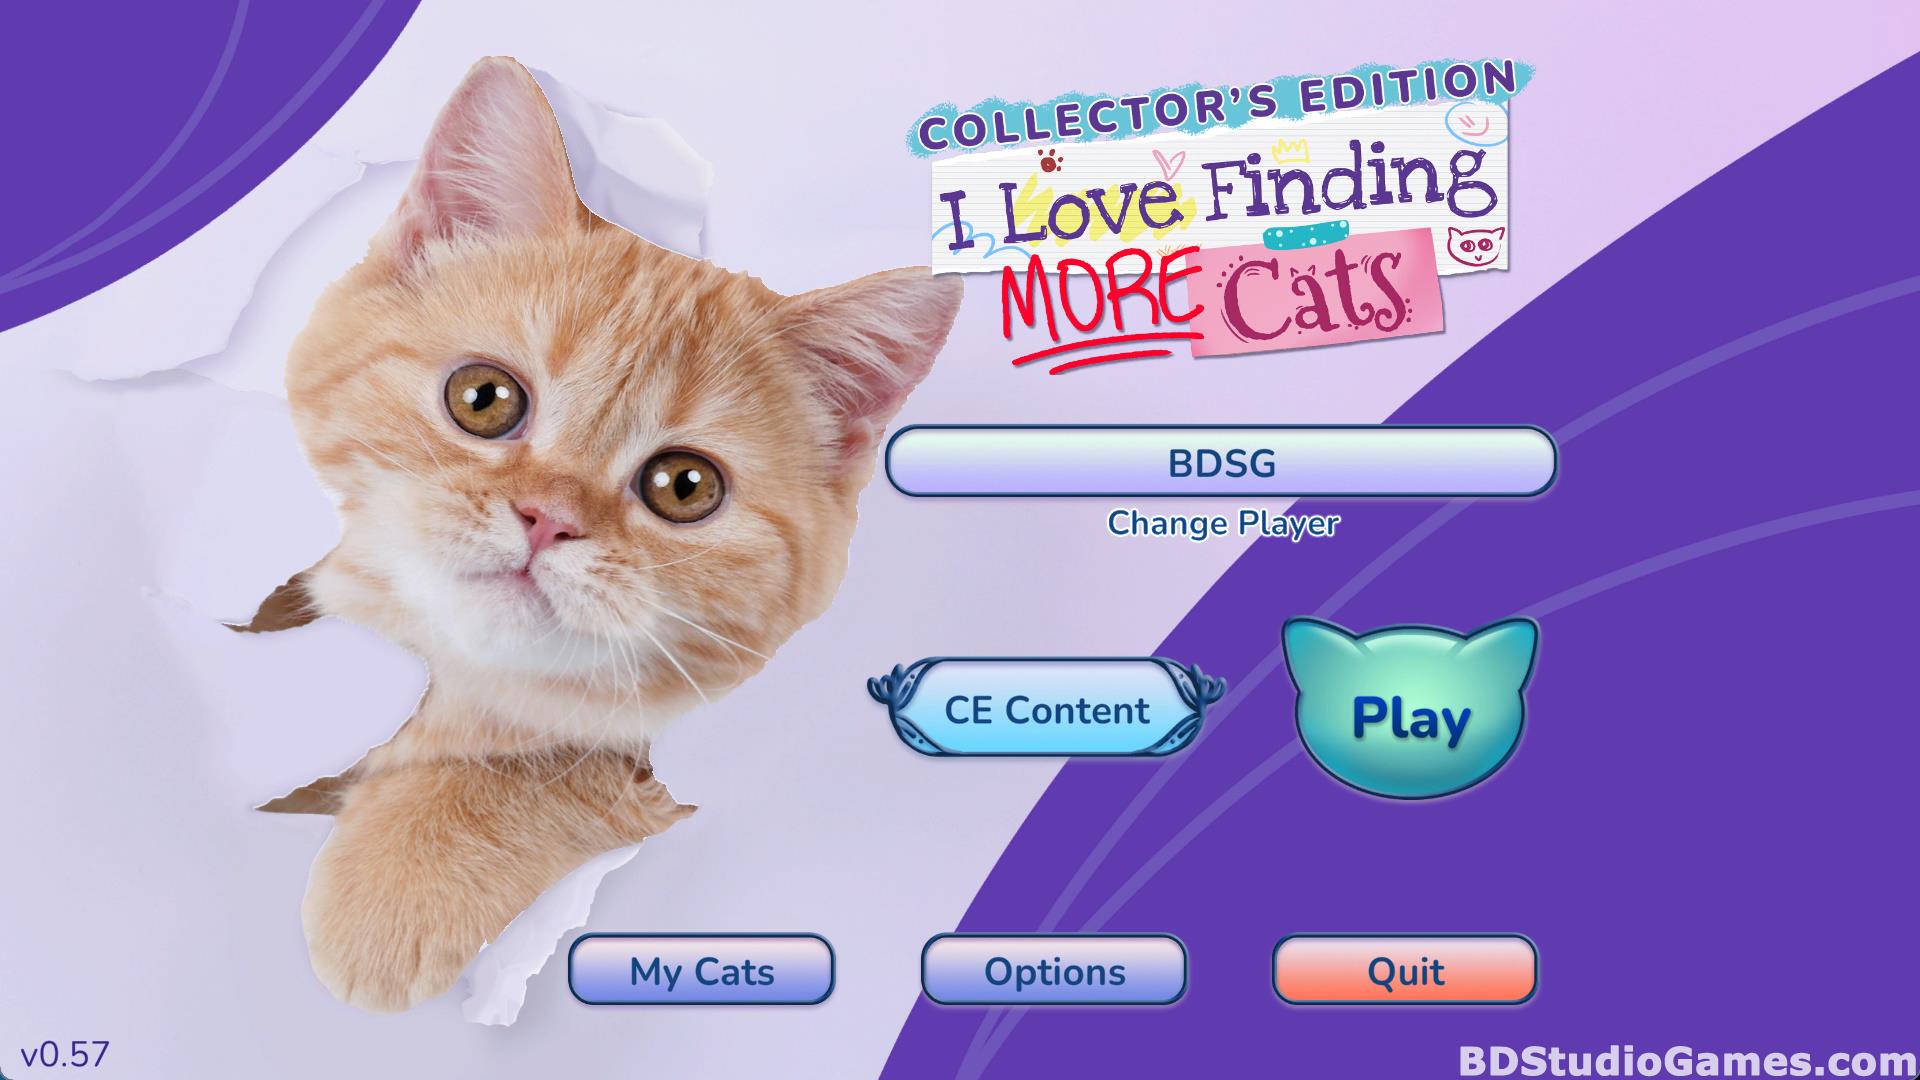 I Love Finding MORE Cats Collector's Edition Free Download Screenshots 01